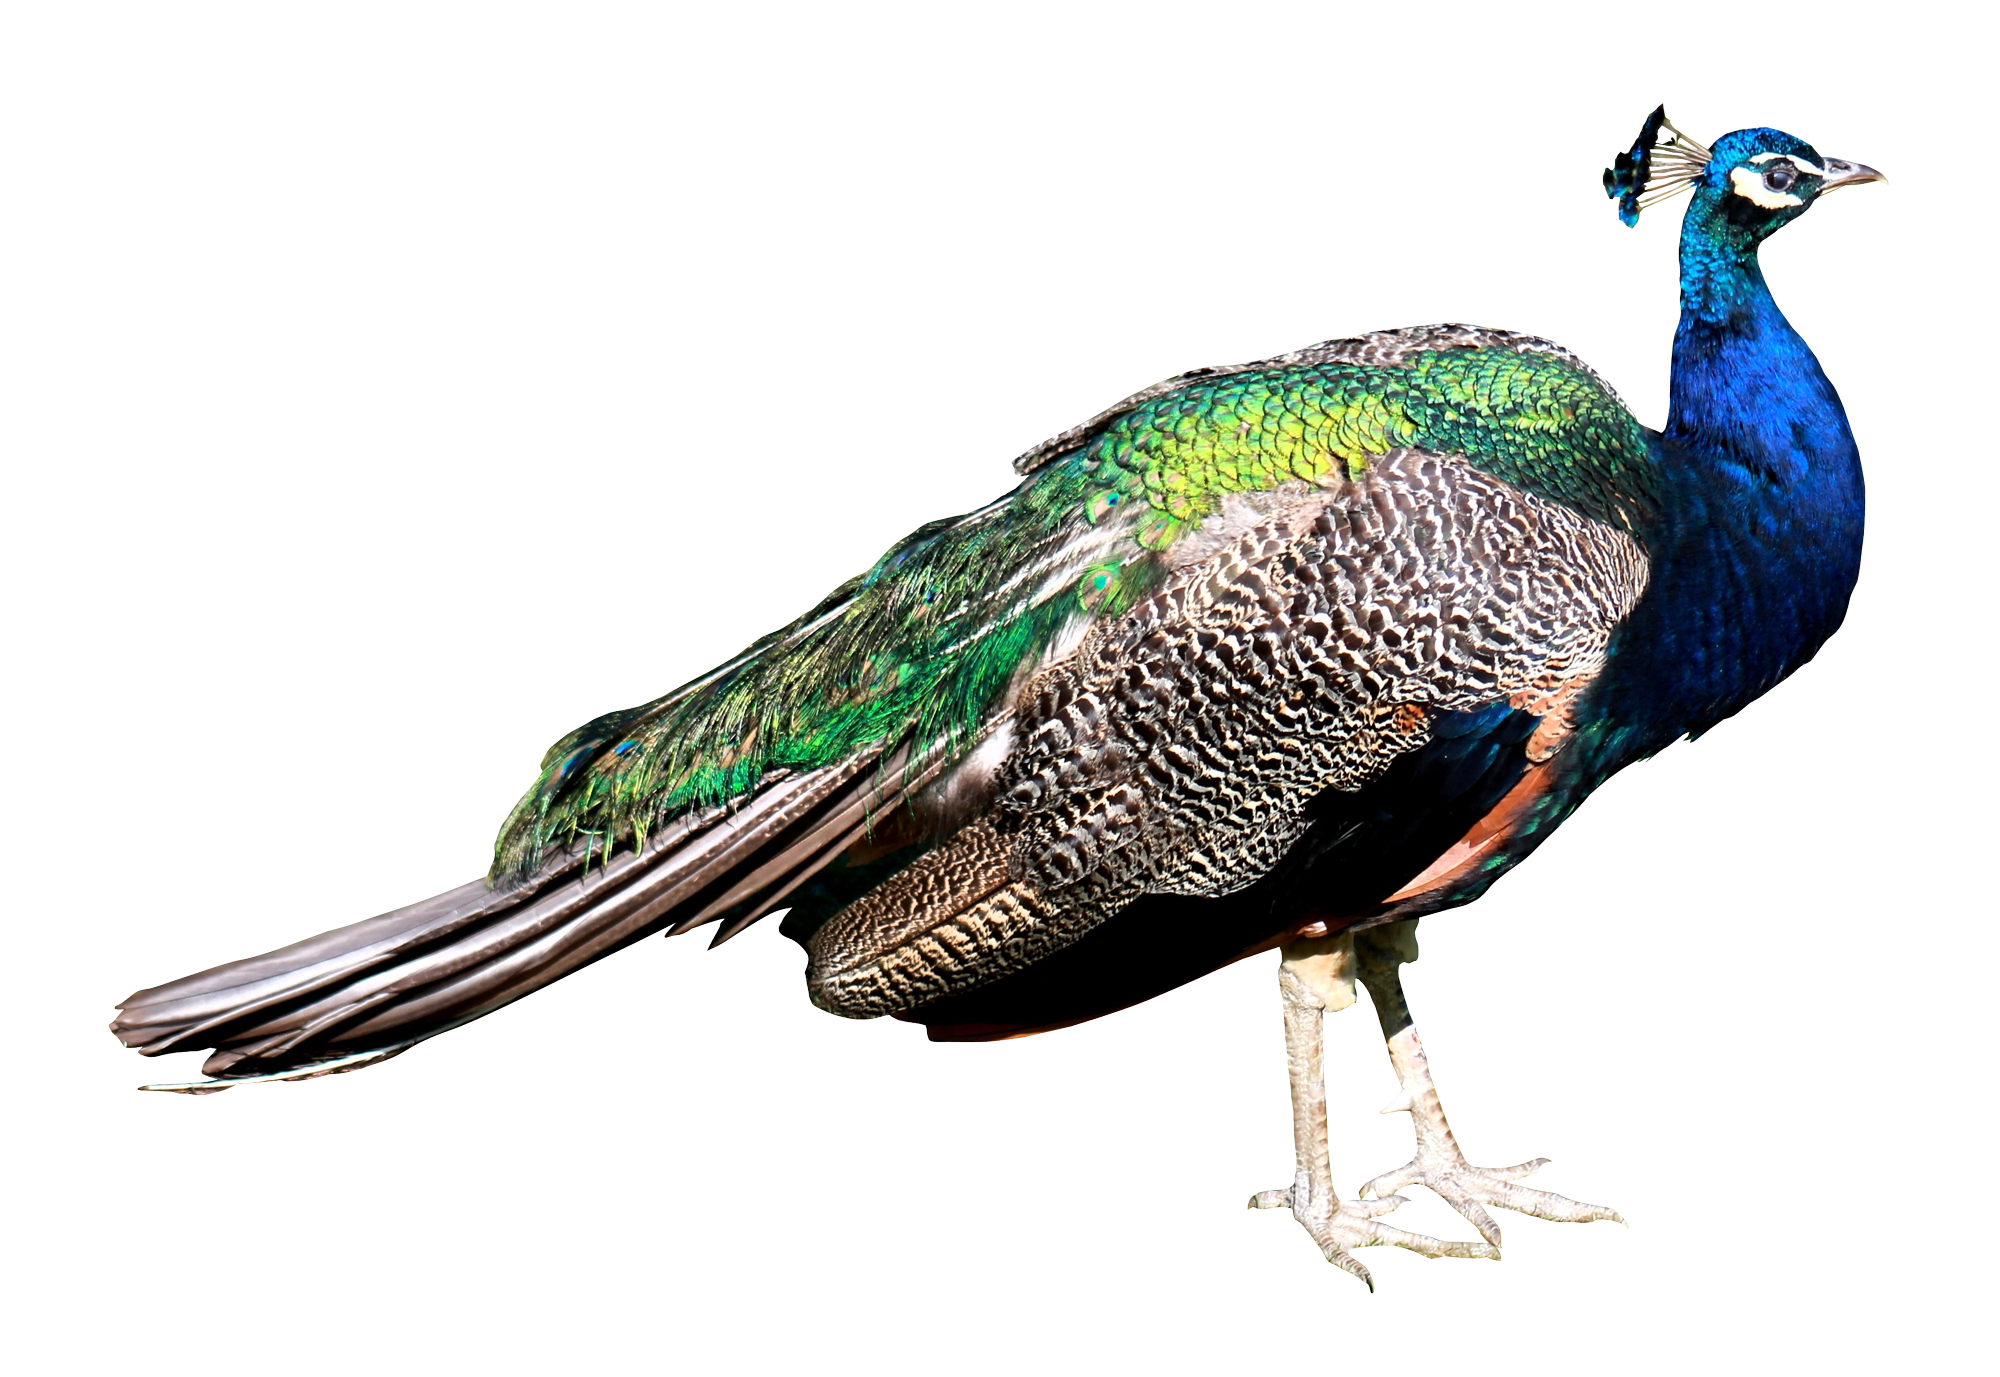 Png image purepng free. Peacock clipart peacock dance